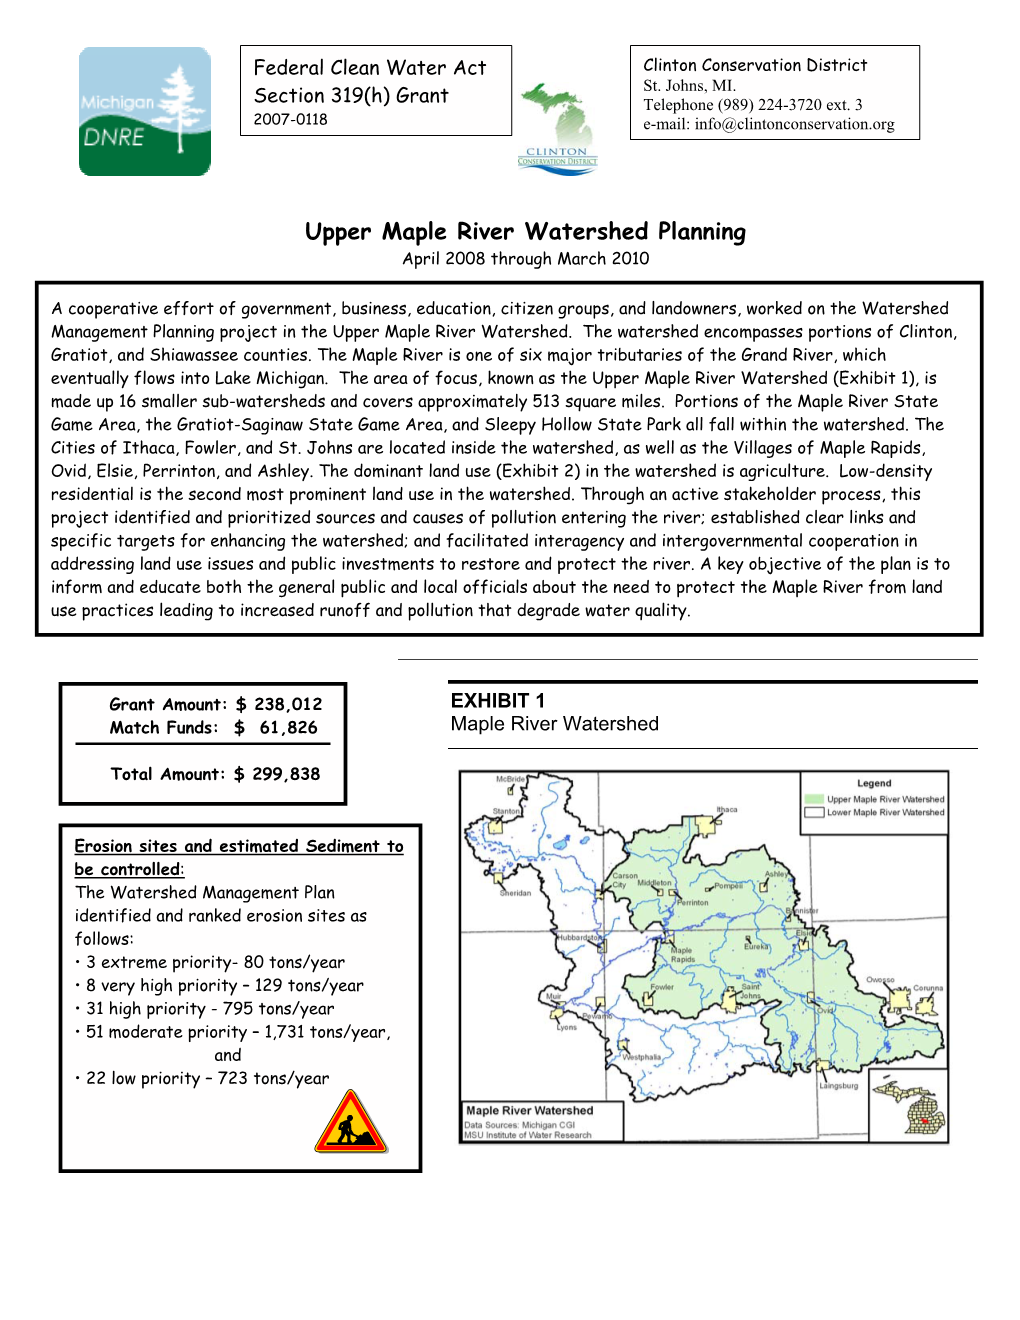 Upper Maple River Watershed Planning April 2008 Through March 2010